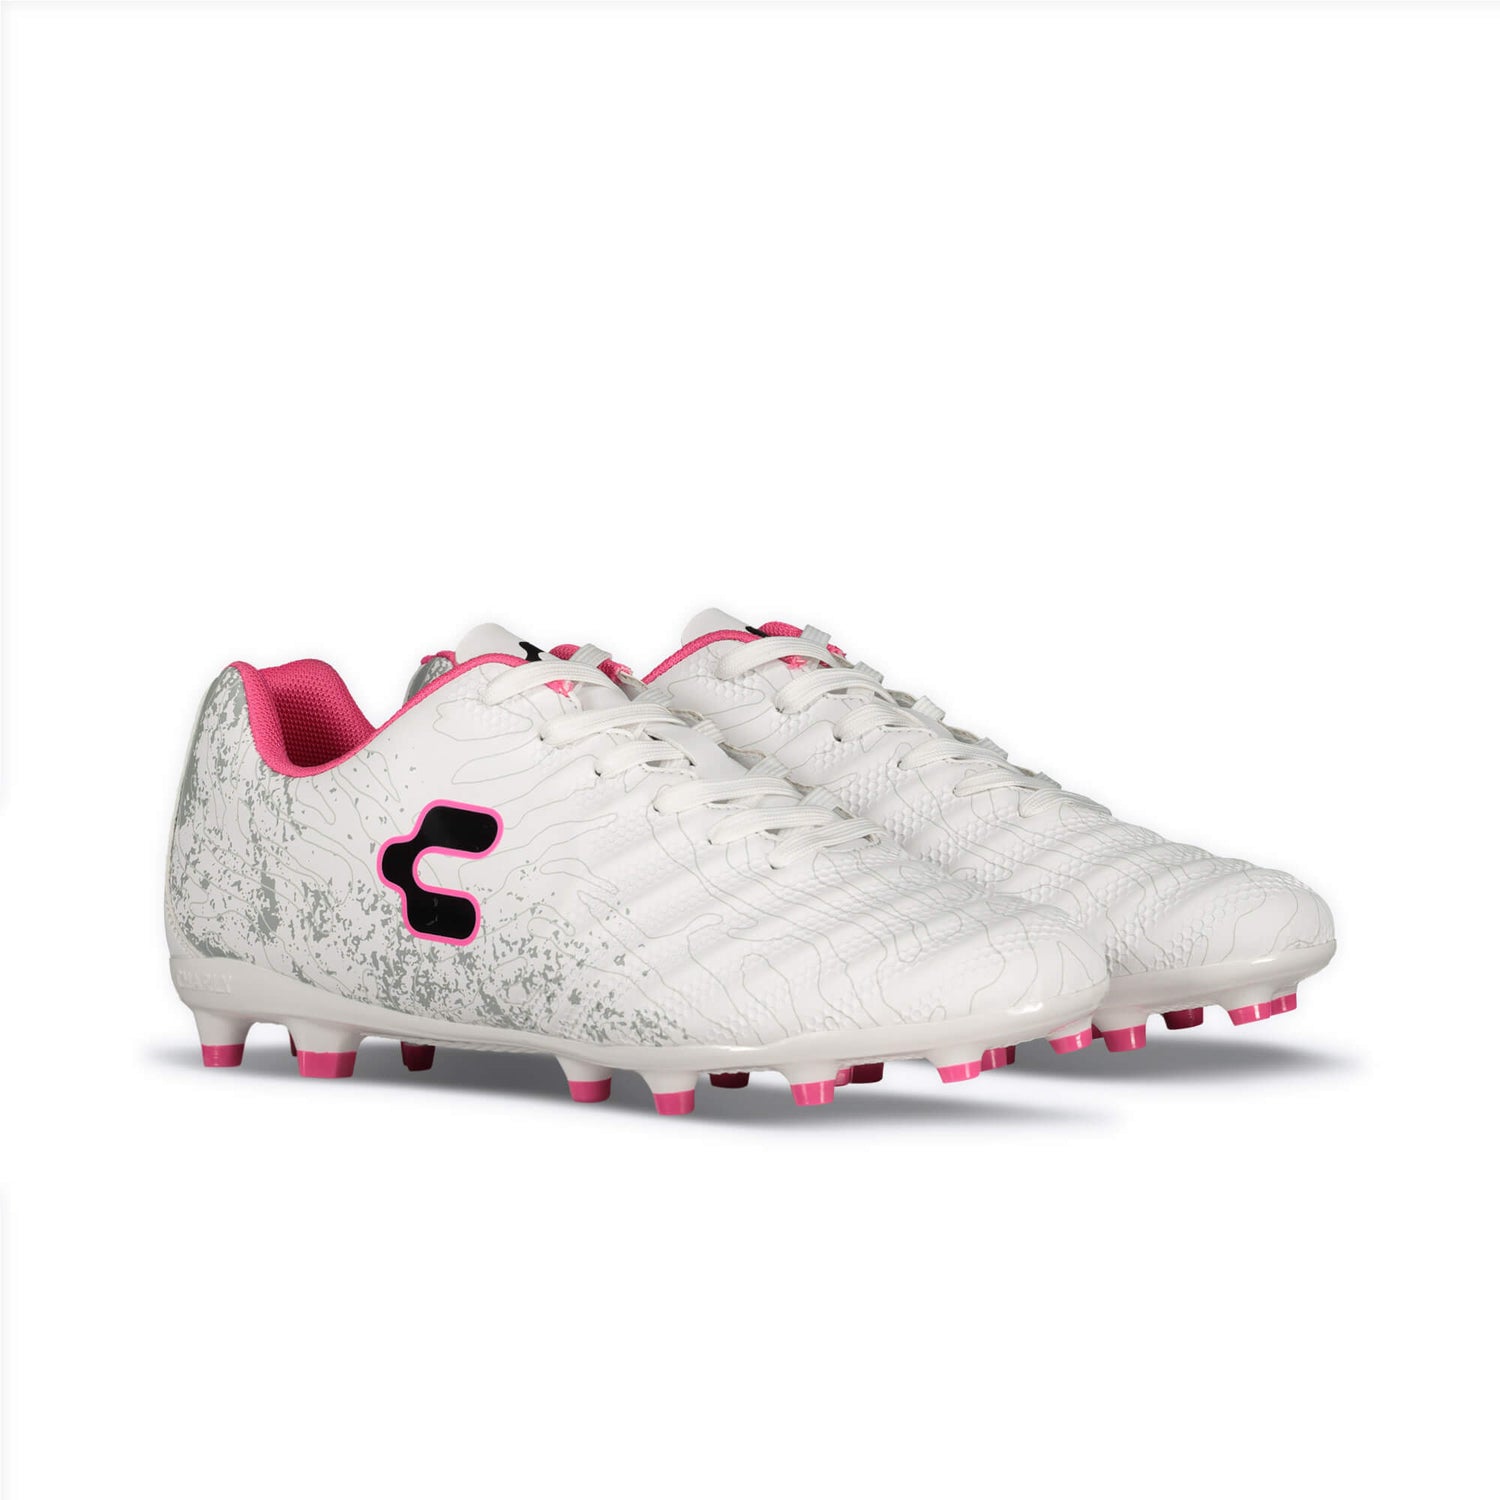 Charly Hotcross 2.0 White-Pink (Pair - Lateral)